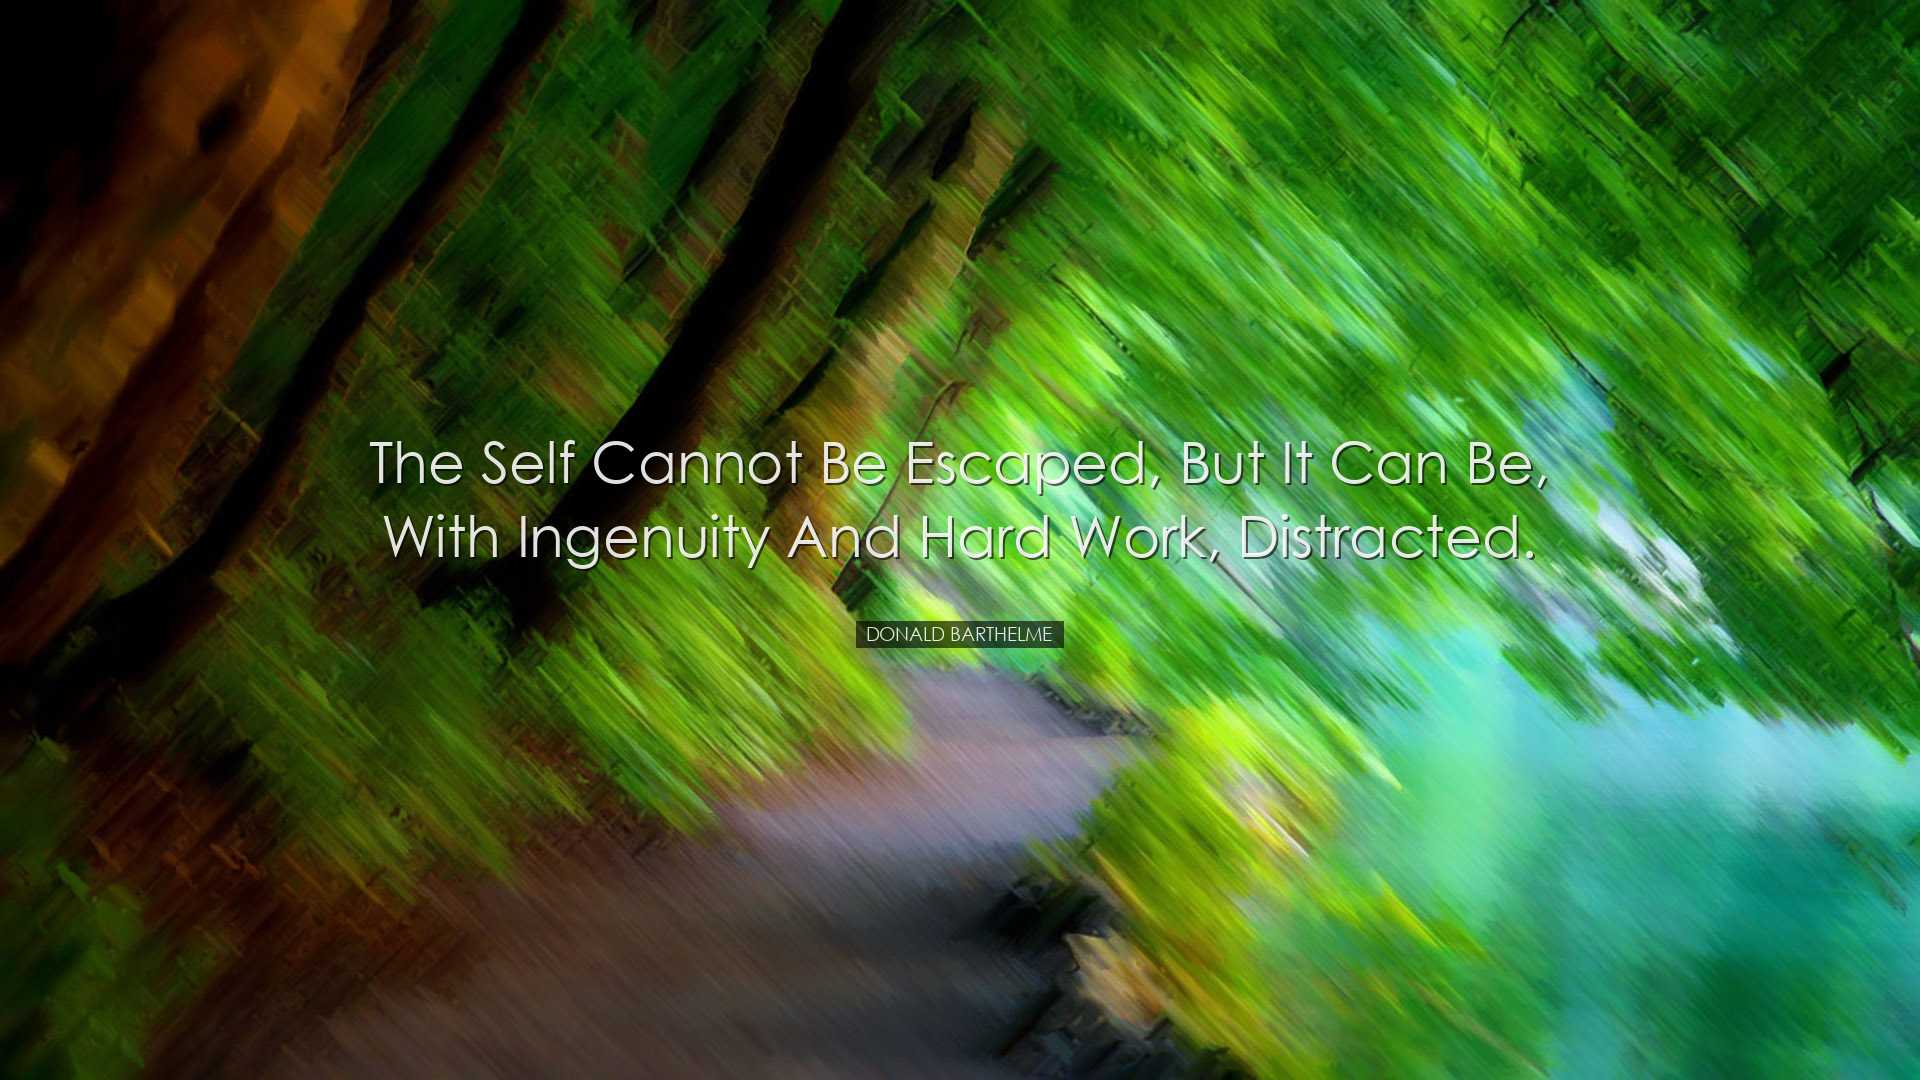 The self cannot be escaped, but it can be, with ingenuity and hard